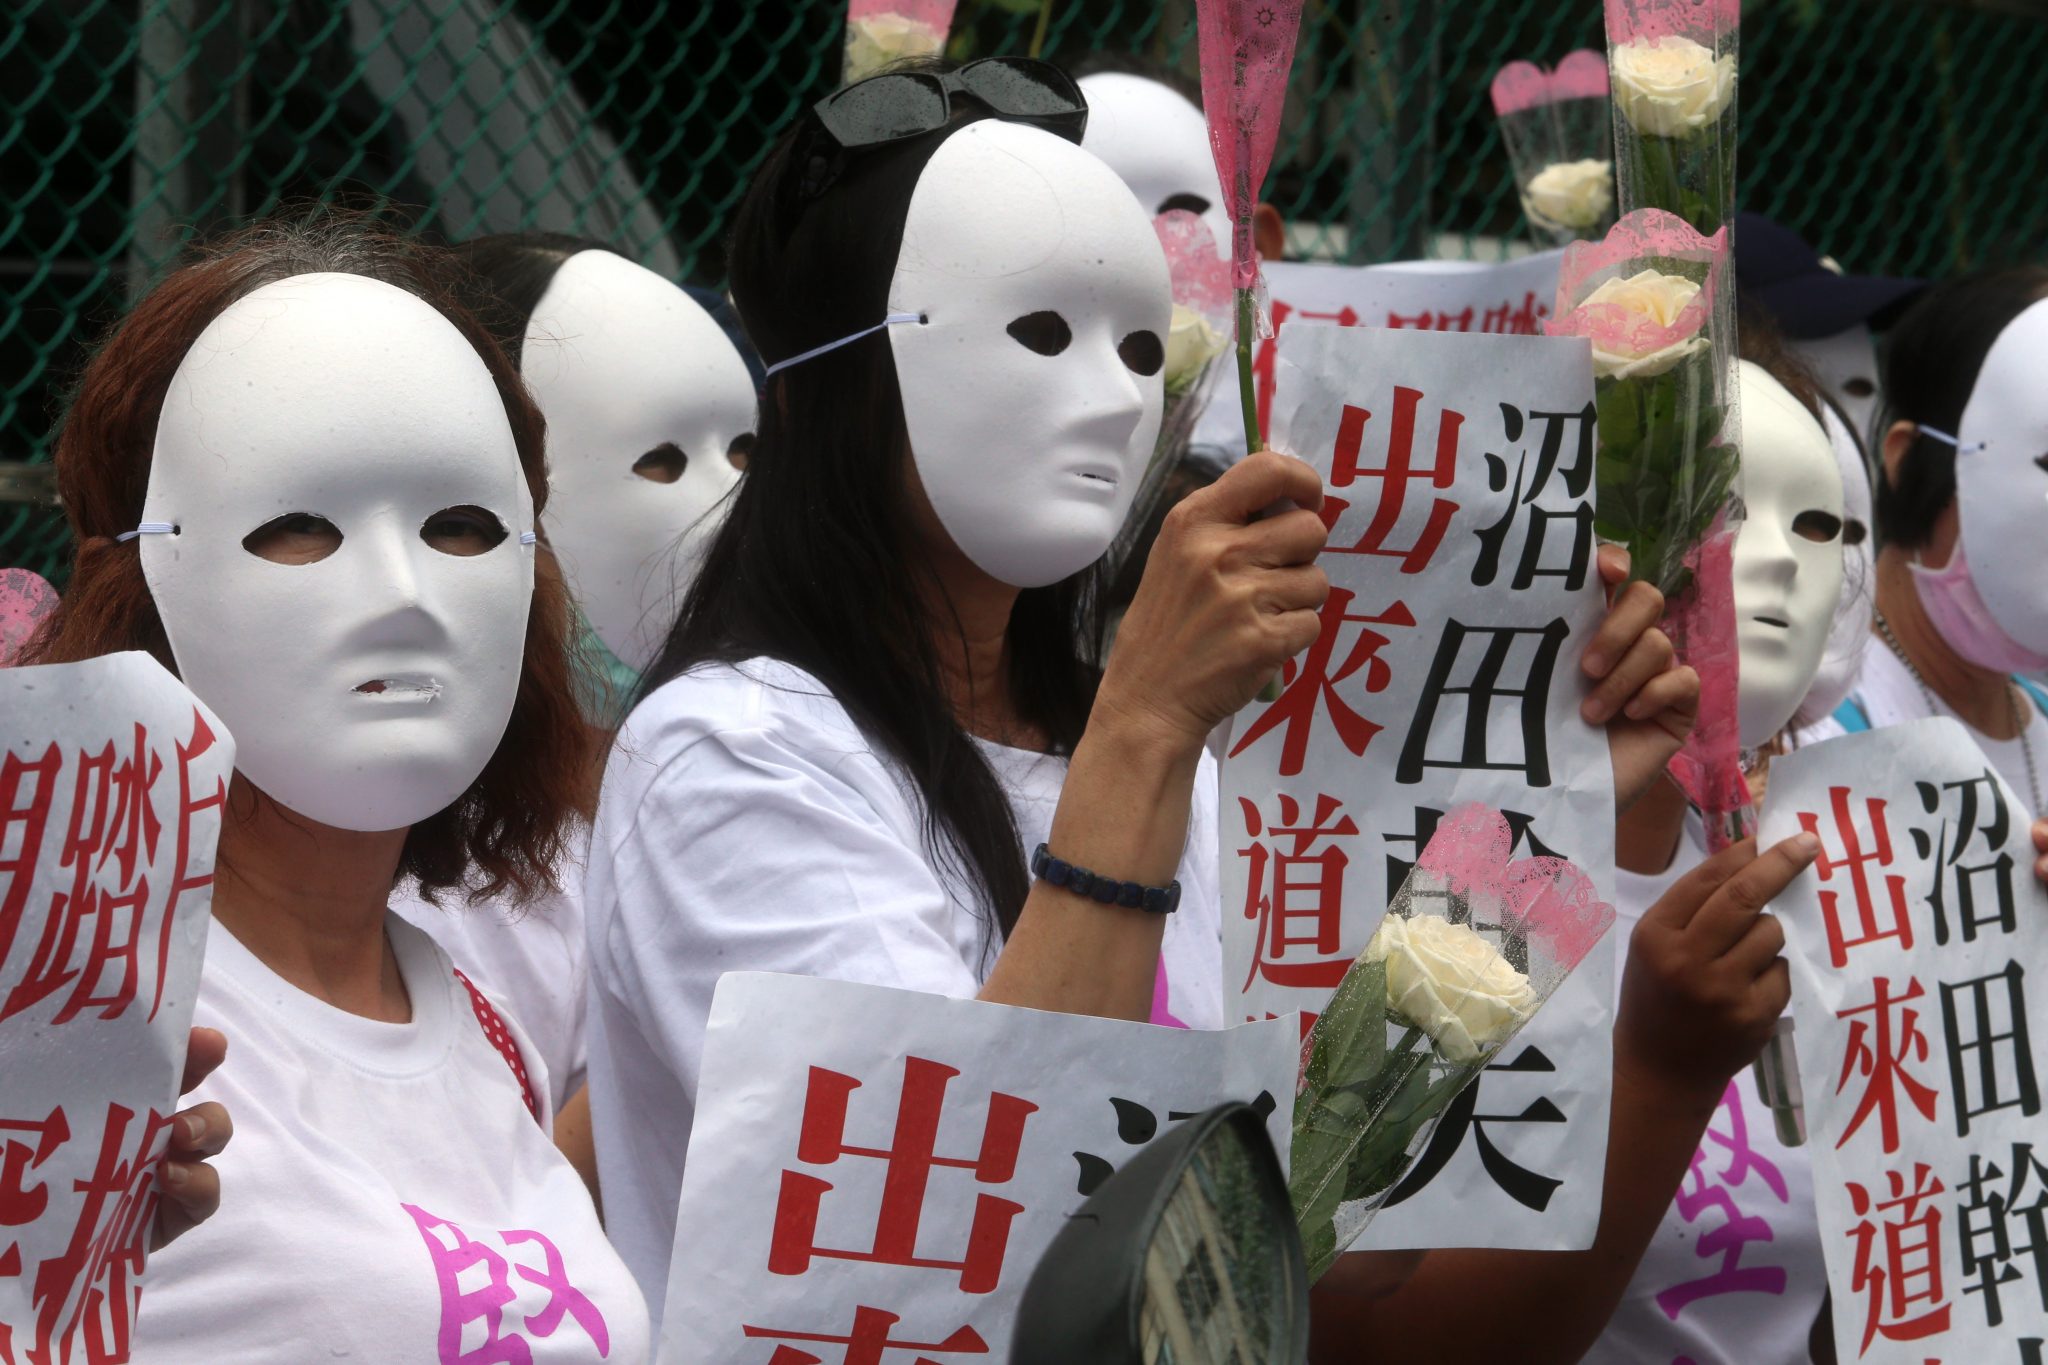 China's appropriation of comfort women activism